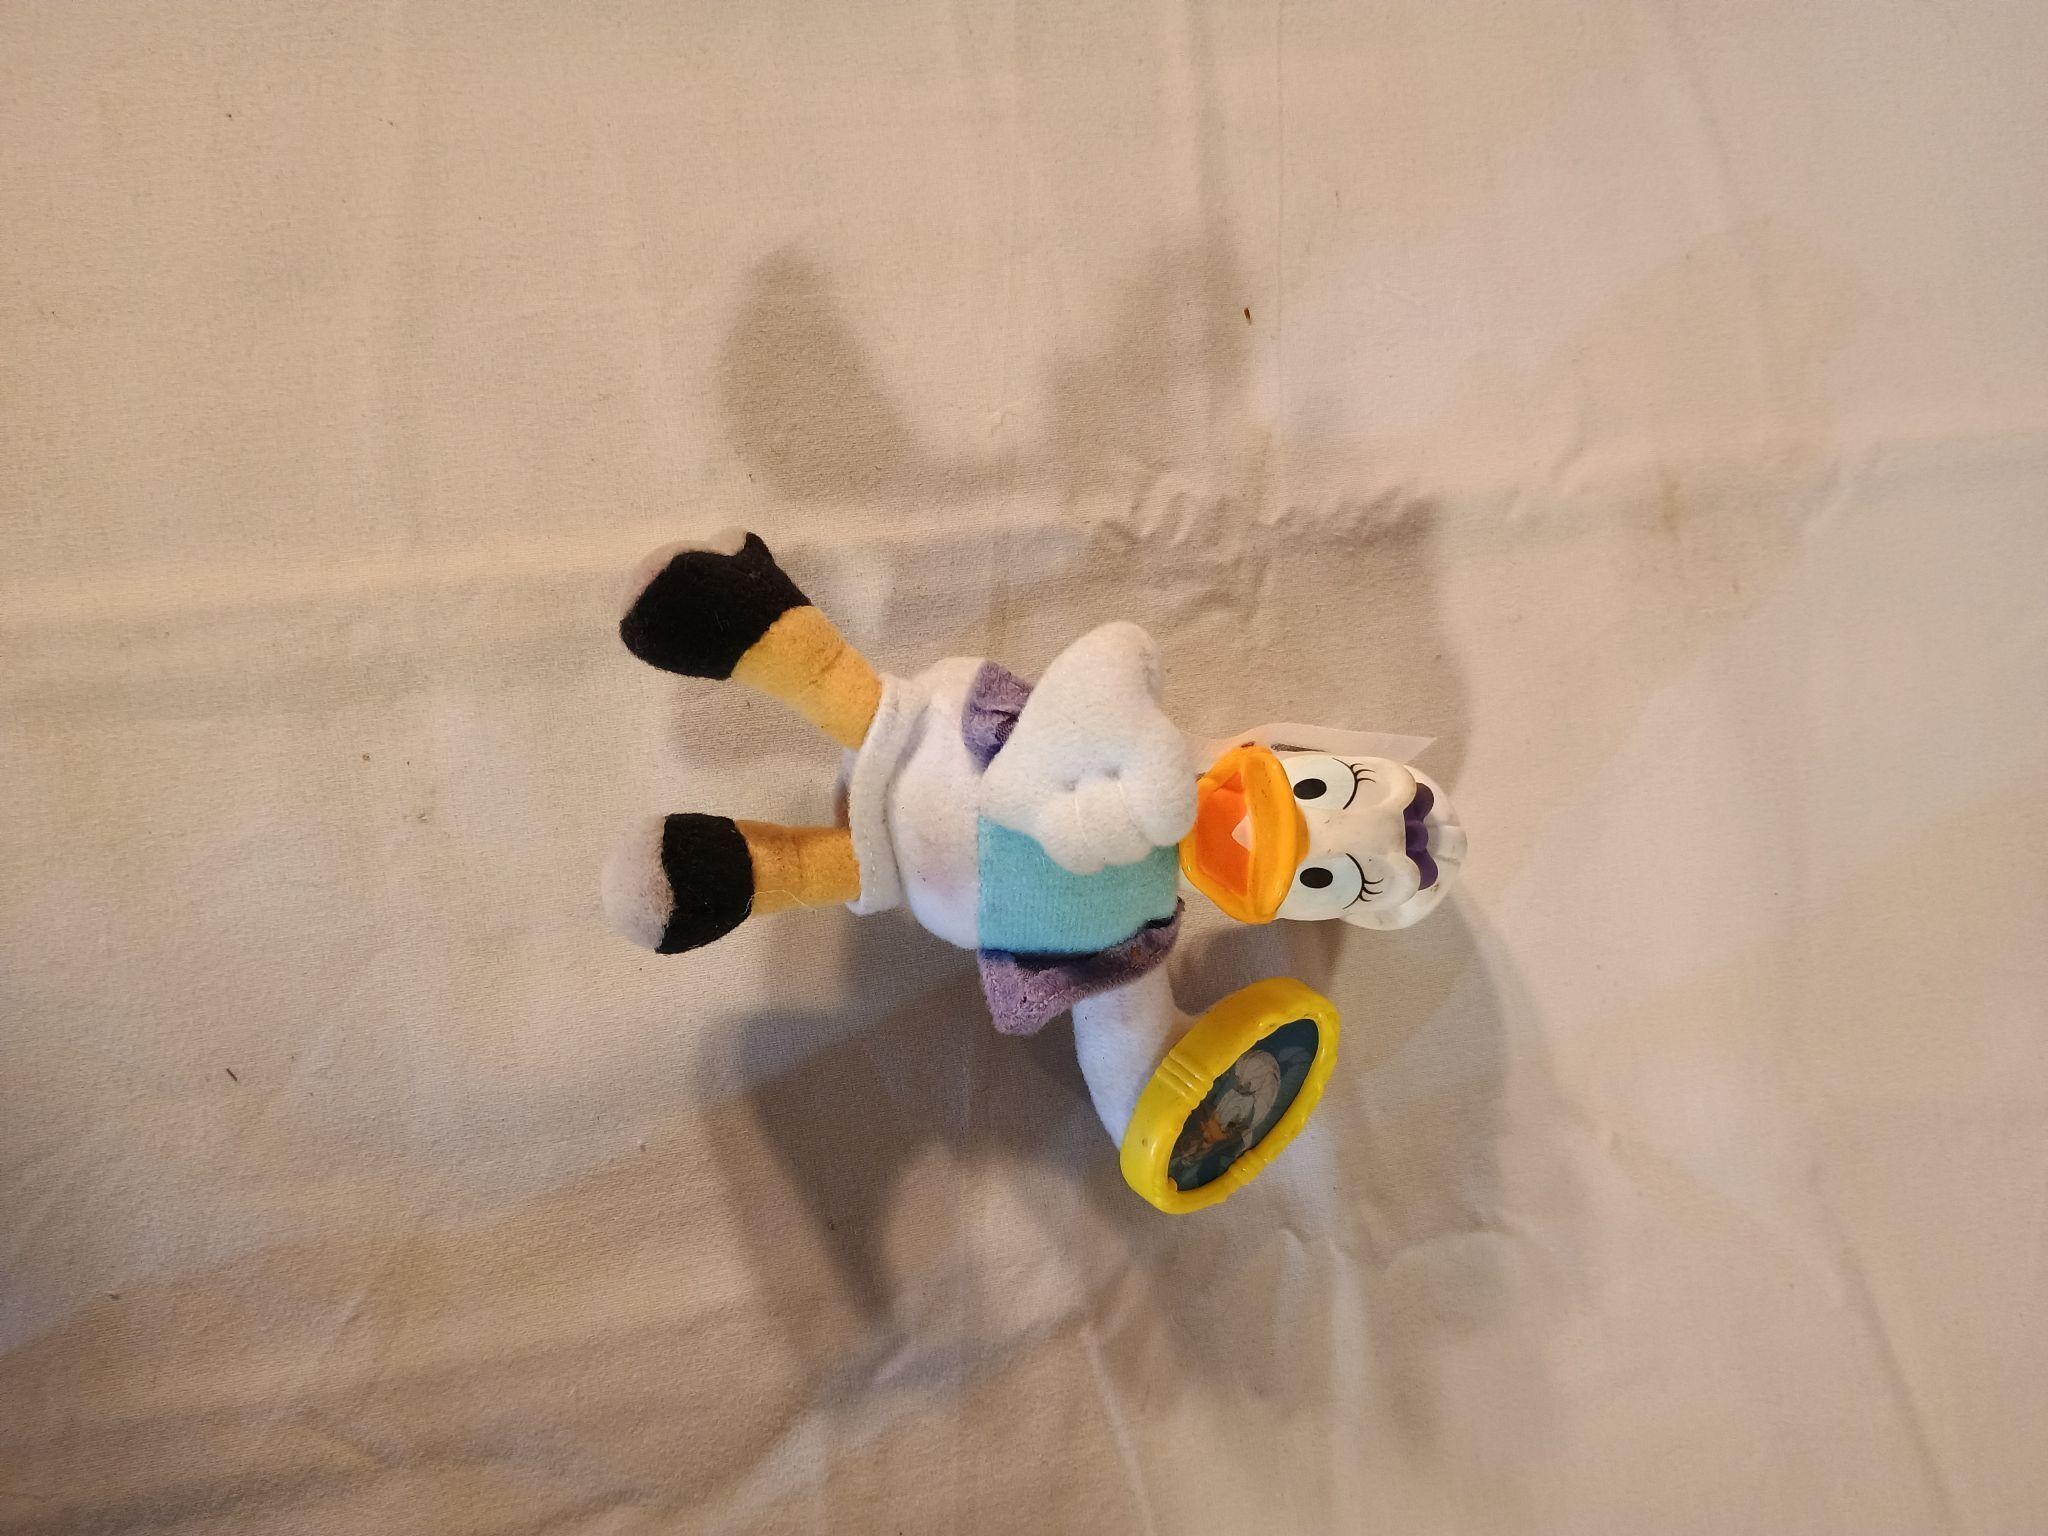 2001 House of Mouse McDonalds Happy Meal Toy